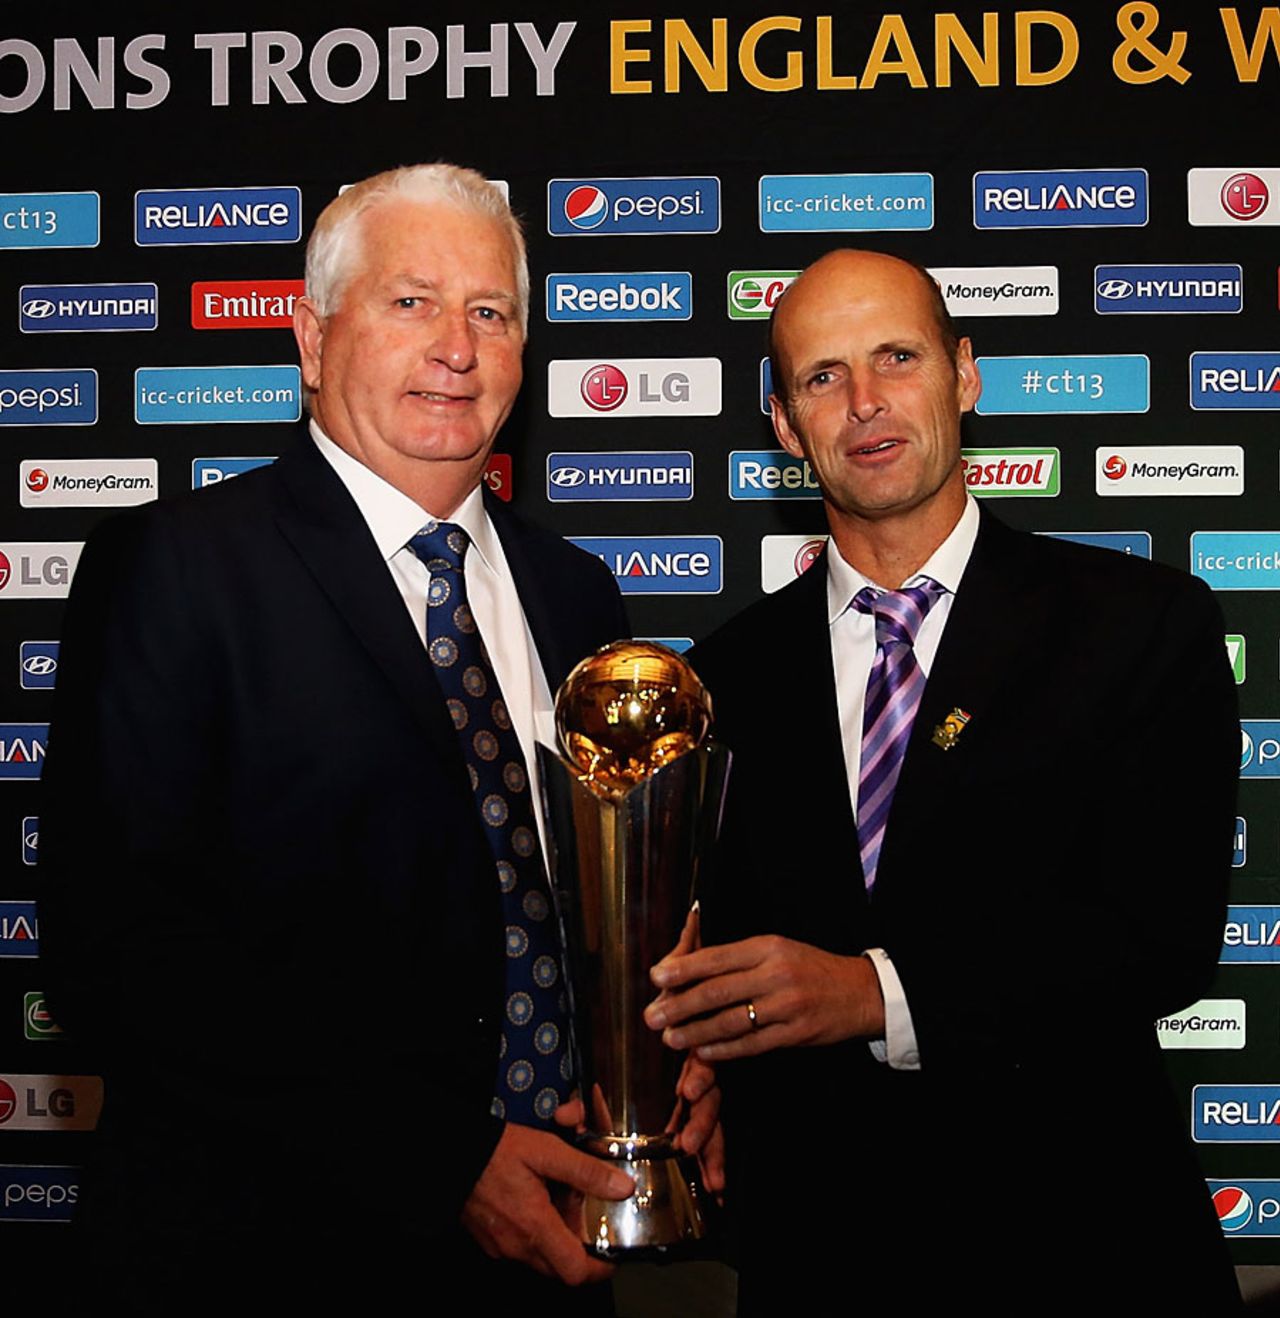 Duncan Fletcher and Gary Kirsten pose with the Champions Trophy on the eve of the tournament, Cardiff, June 5, 2013